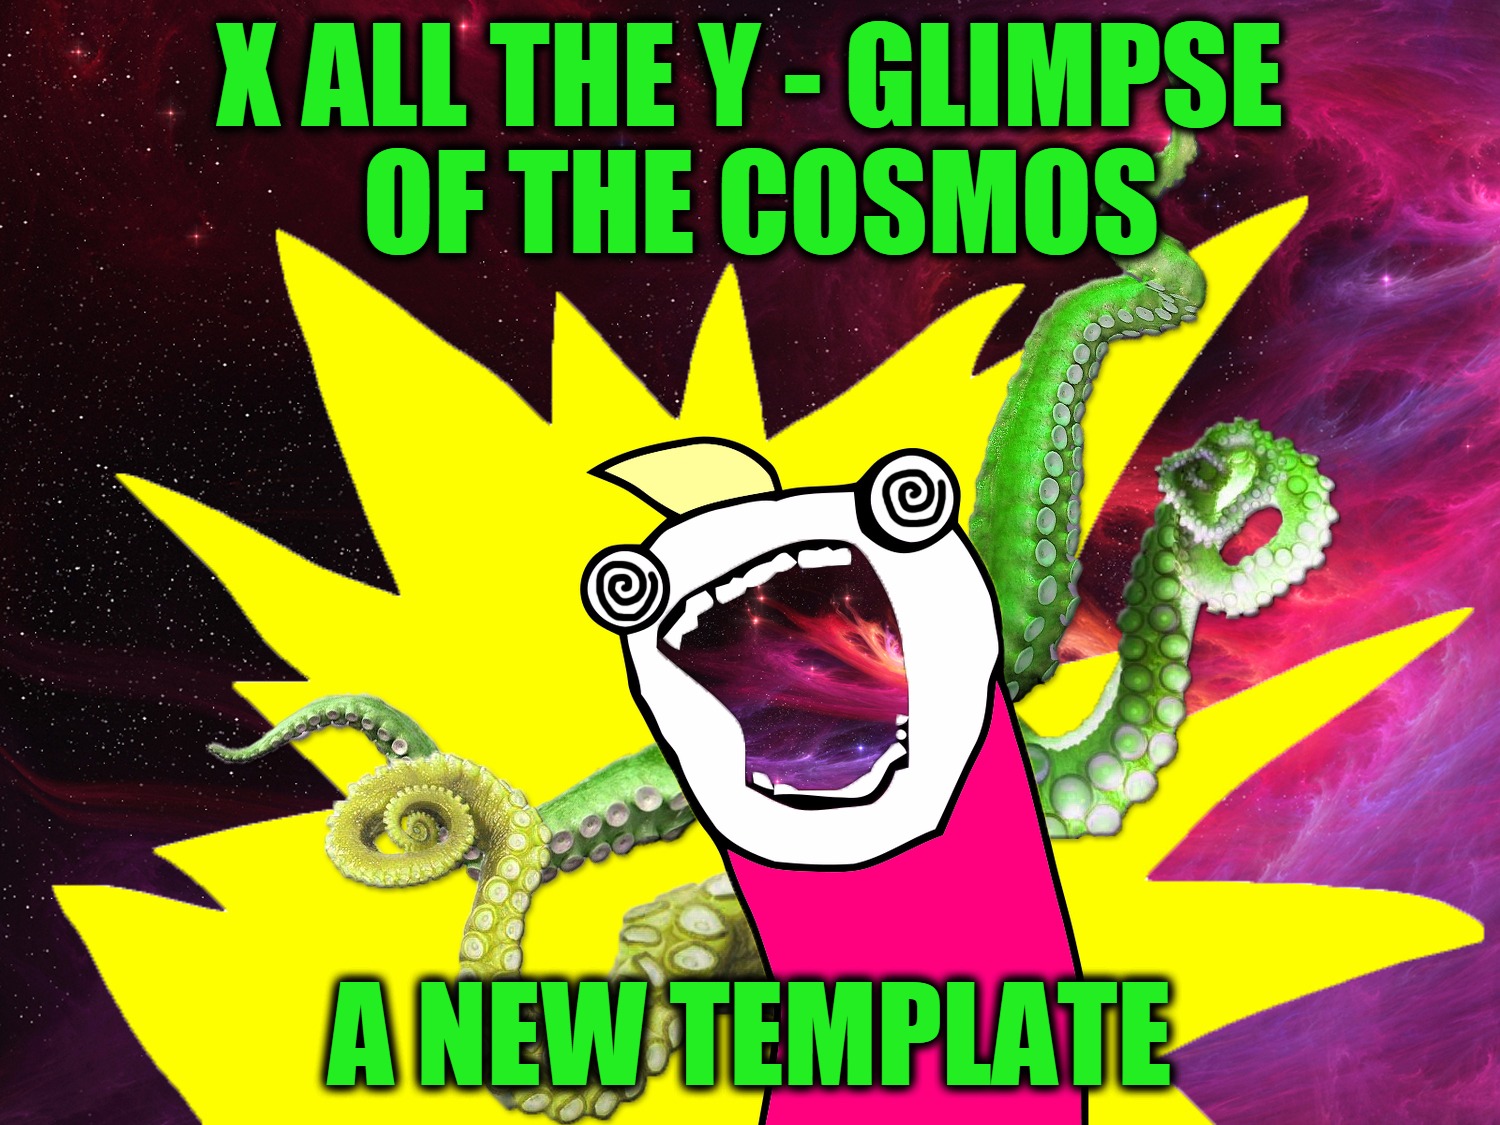 X All The Y - Glimpse Of The Cosmos: A New Template | X ALL THE Y - GLIMPSE OF THE COSMOS; A NEW TEMPLATE | image tagged in x all the y - glimpse of the cosmos,x all the y,glimpse of the cosmos,custom template,lovecraft mythos cosmicism,headfoot | made w/ Imgflip meme maker